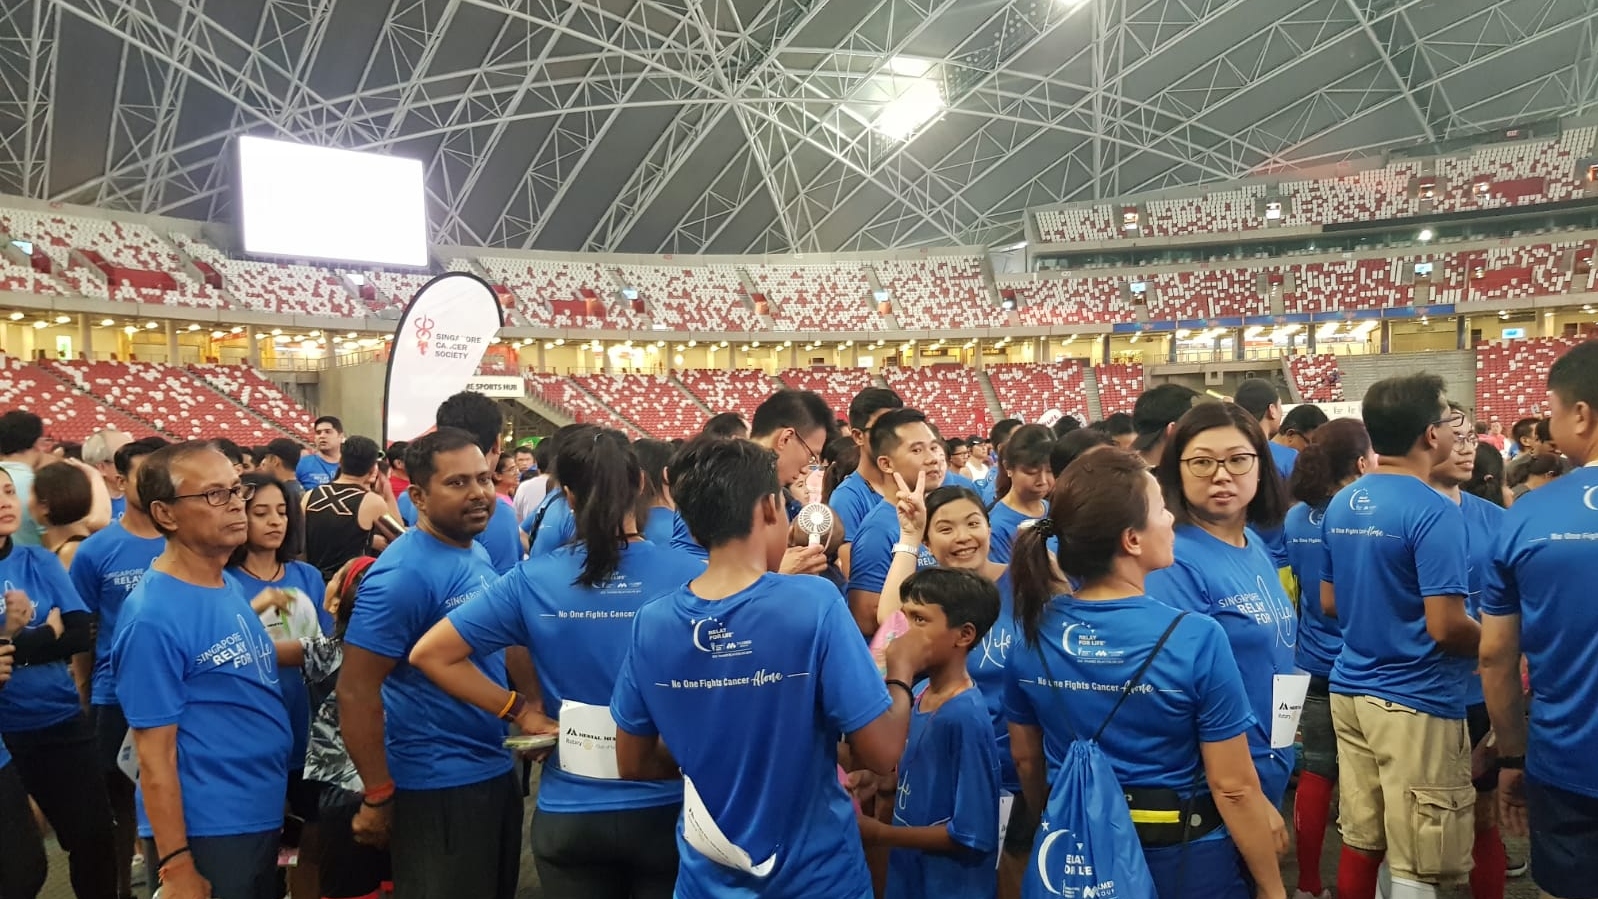 ZEISS participants of Relay for Life 2019